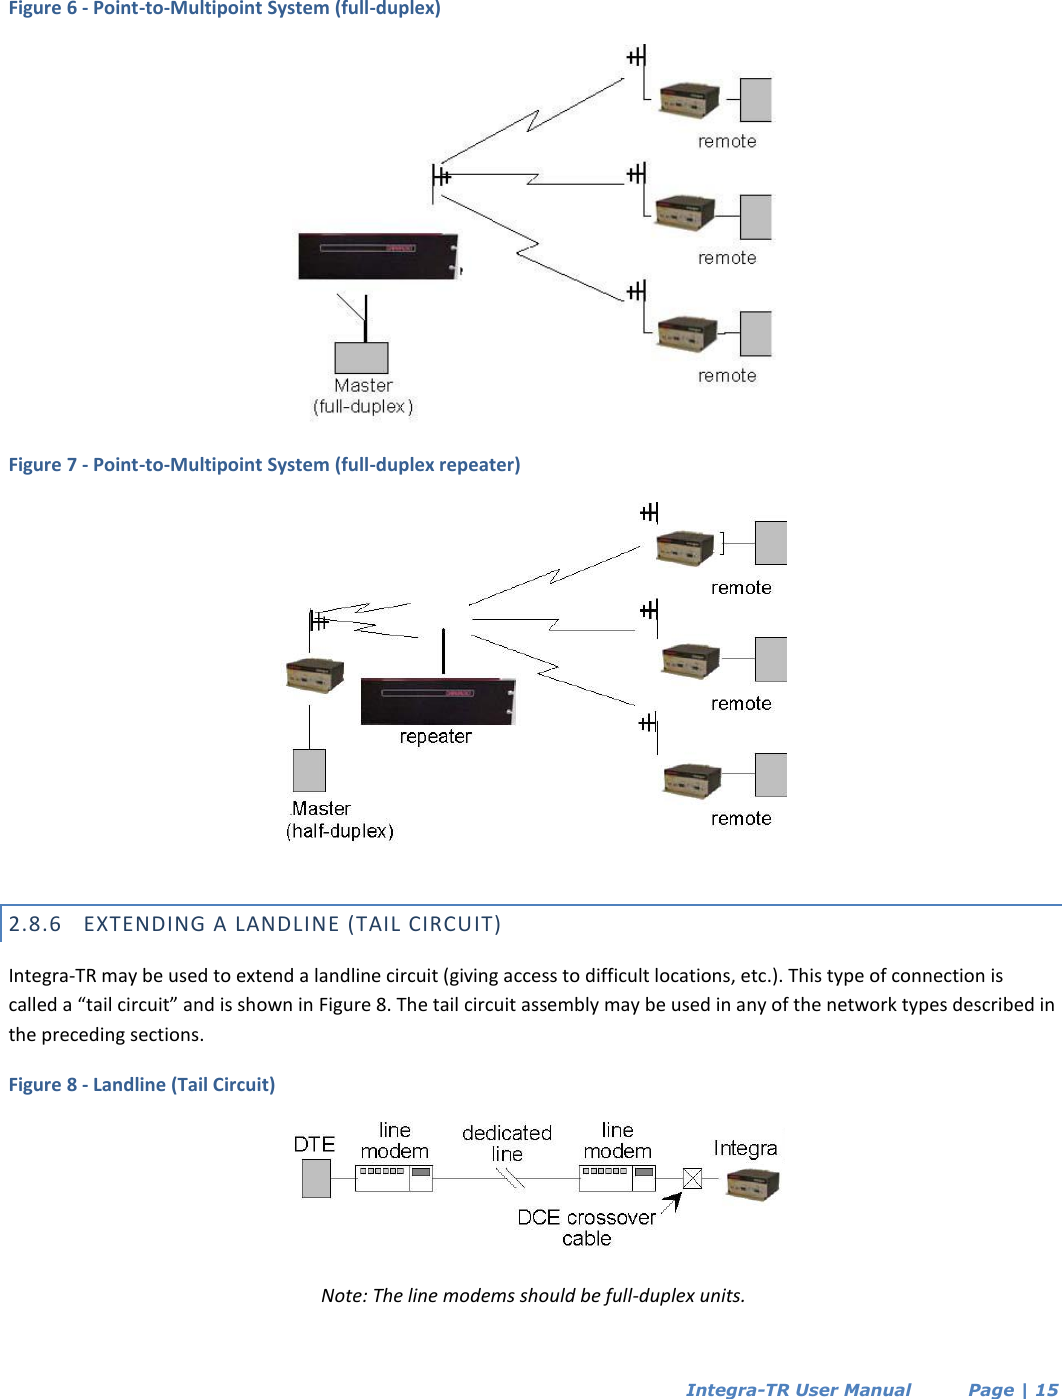  Integra-TR User Manual          Page | 15   Figure 6 - Point-to-Multipoint System (full-duplex)  Figure 7 - Point-to-Multipoint System (full-duplex repeater)  2.8.6 EXTENDING A LANDLINE (TAIL CIRCUIT) Integra-TR may be used to extend a landline circuit (giving access to difficult locations, etc.). This type of connection is called a “tail circuit” and is shown in Figure 8. The tail circuit assembly may be used in any of the network types described in the preceding sections. Figure 8 - Landline (Tail Circuit)  Note: The line modems should be full-duplex units.  